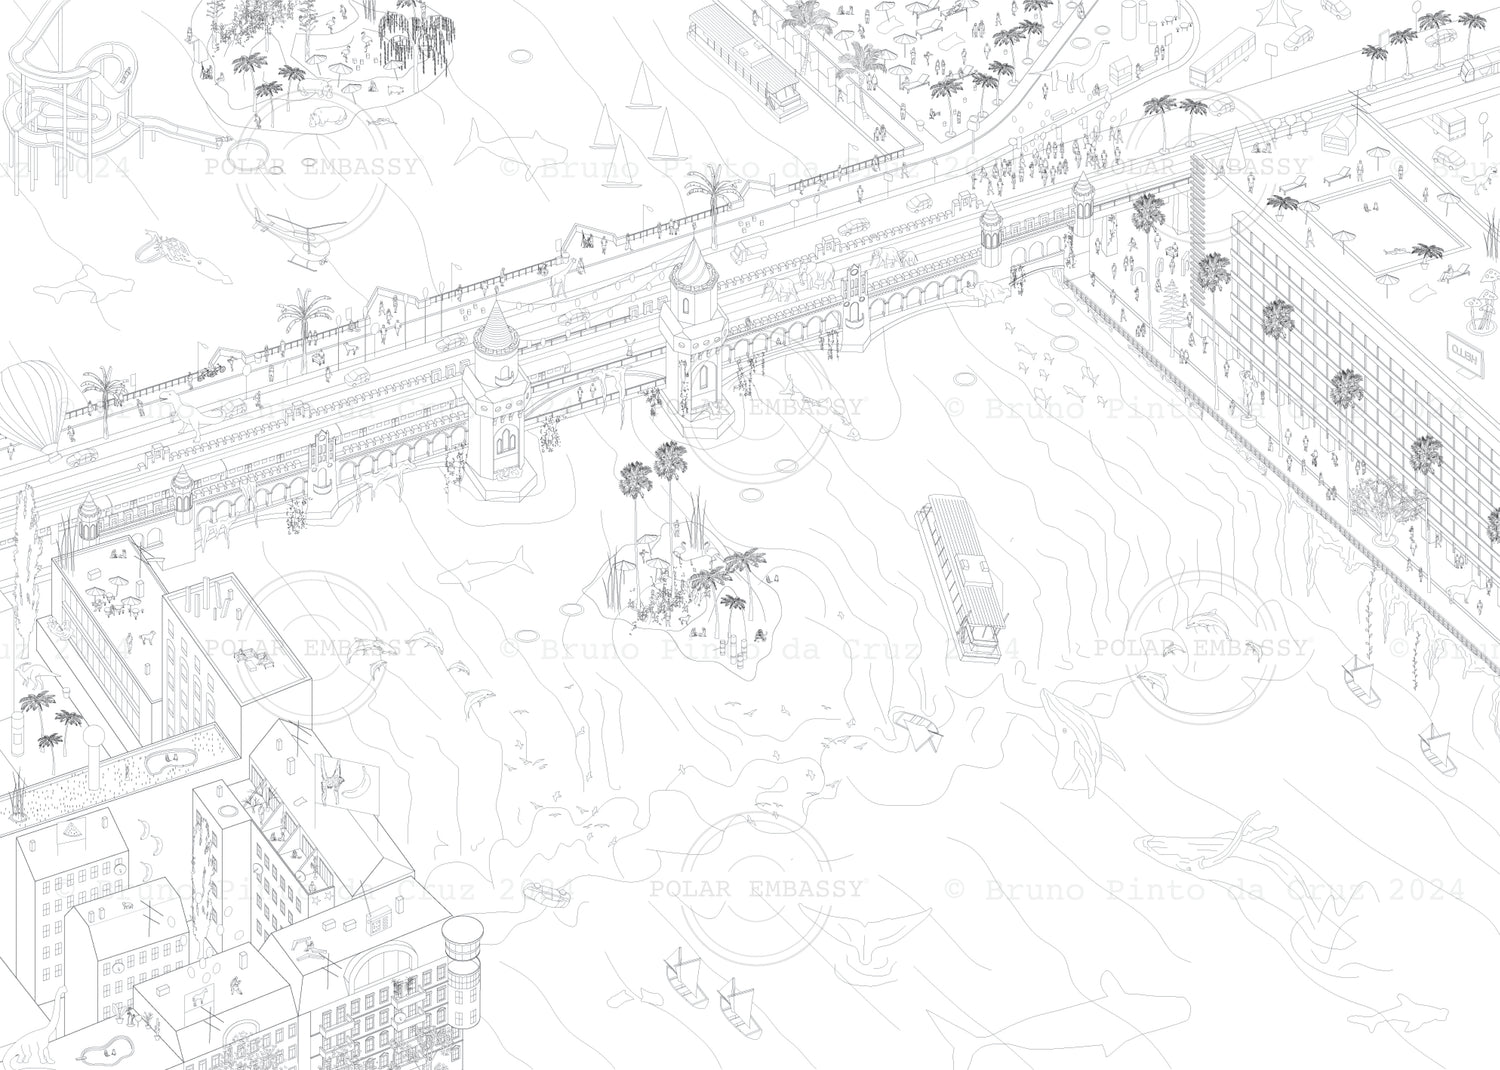 Black and white illustration of Oberbaumbrücke Berlin Kreuzberg. There are whales, dinosaurs, and happy chaos in the details.